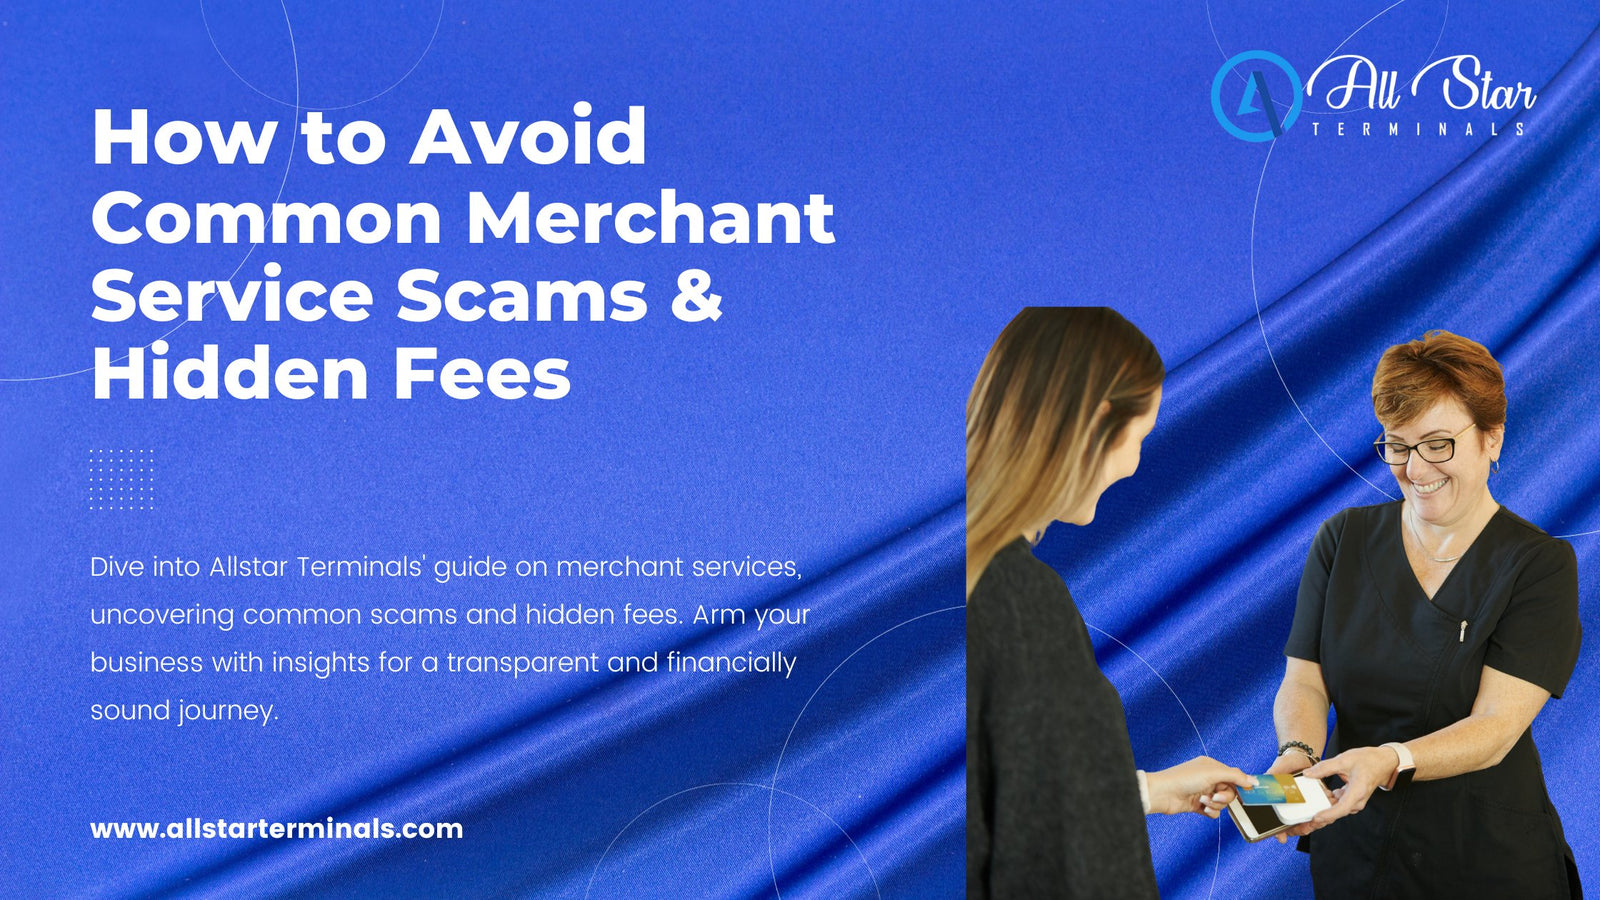 How to Avoid Common Merchant Service Scams and Hidden Fees - All-Star Terminals